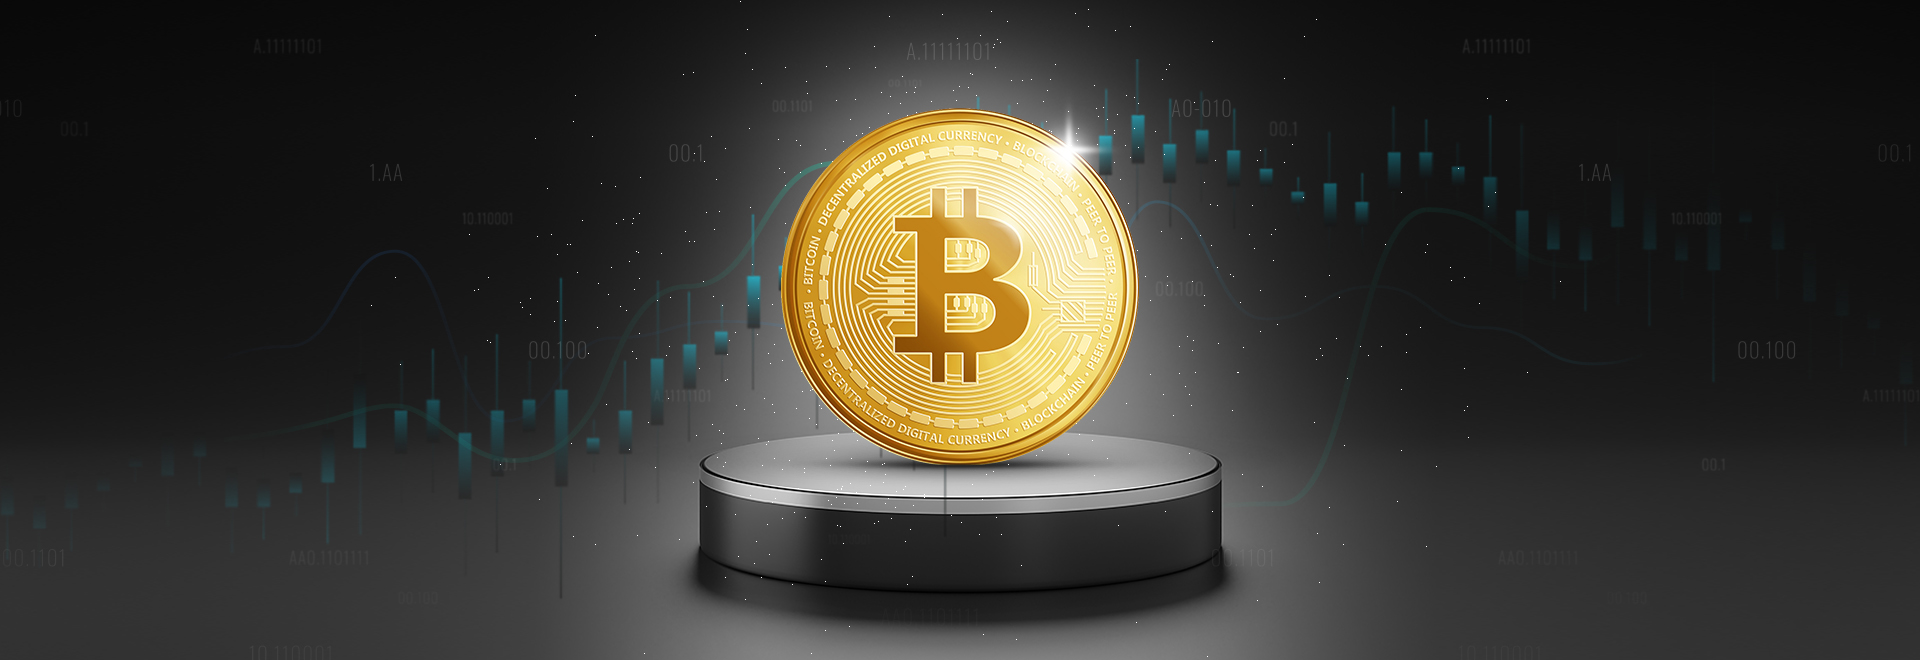 Bitcoin Options Market Offers Forex Traders Valuable Insights